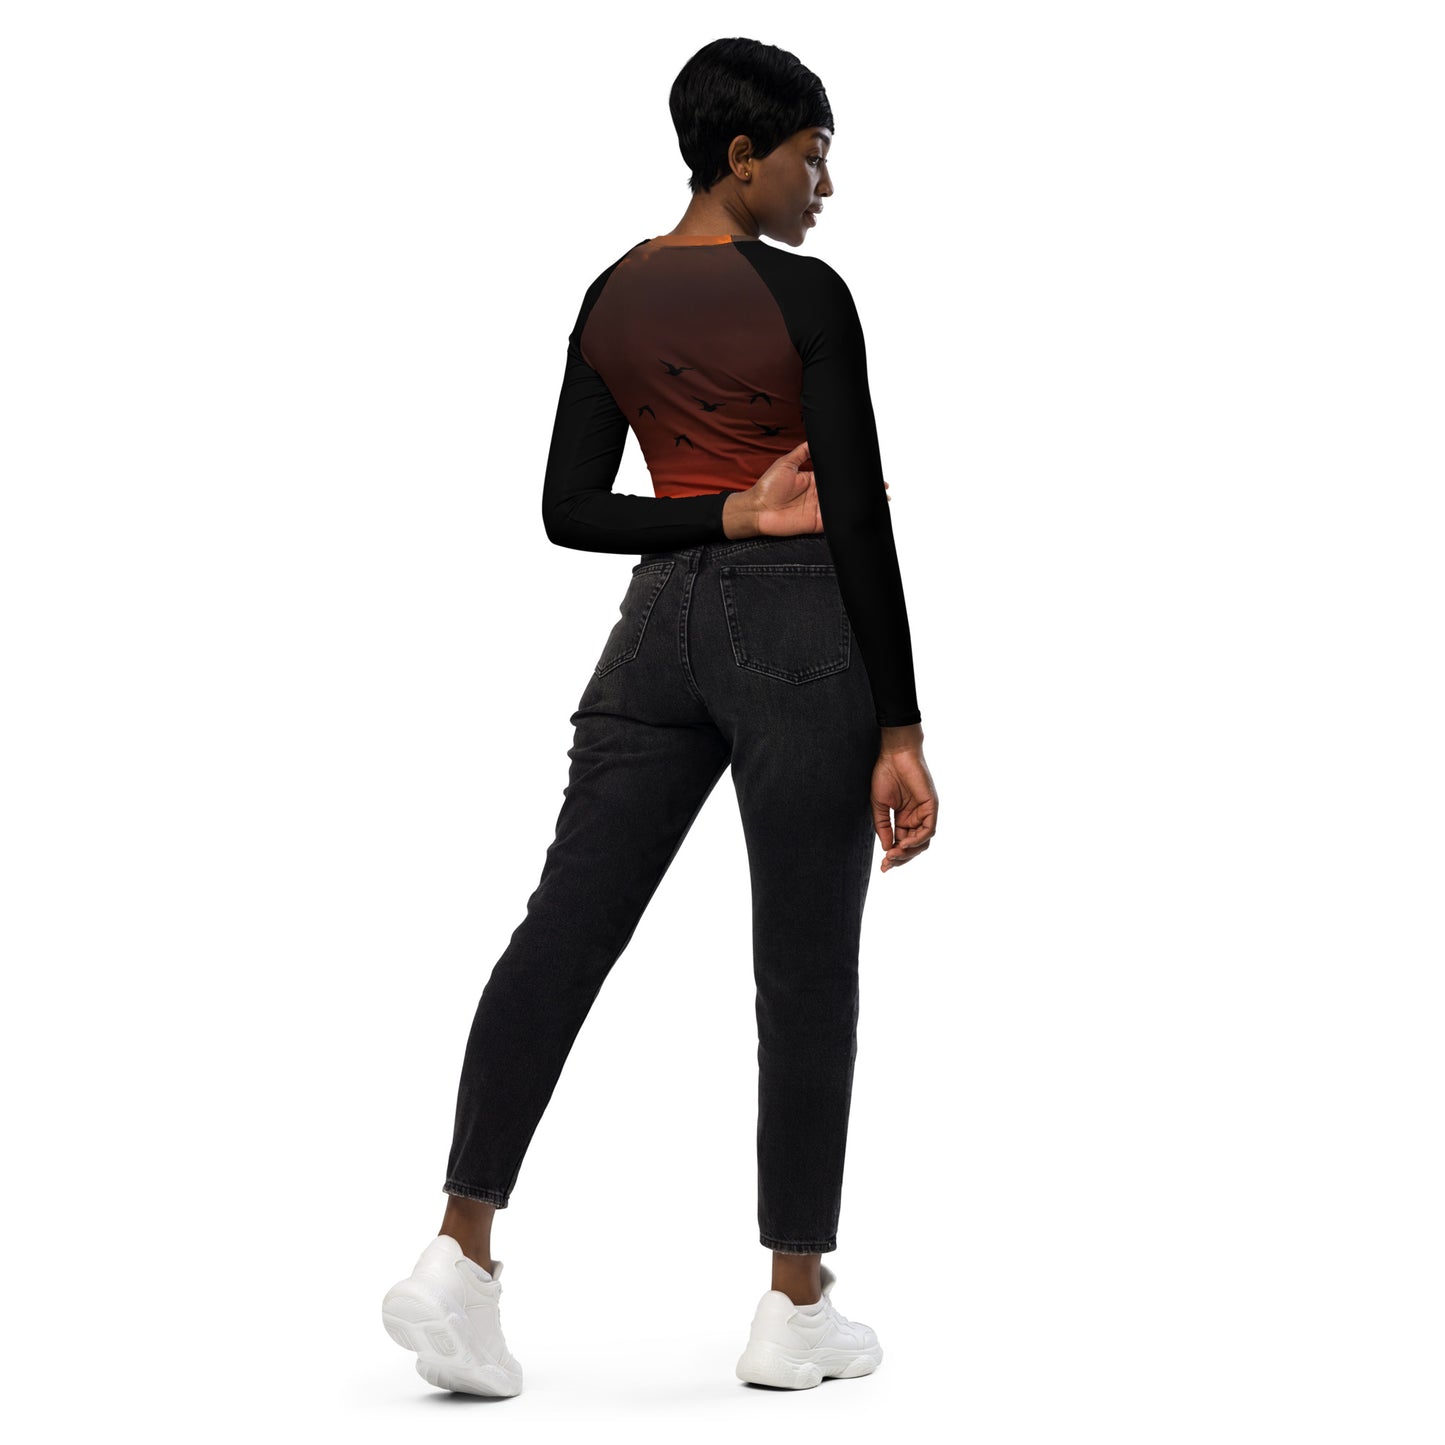 Long-sleeve crop top ( The Sunset Collection )